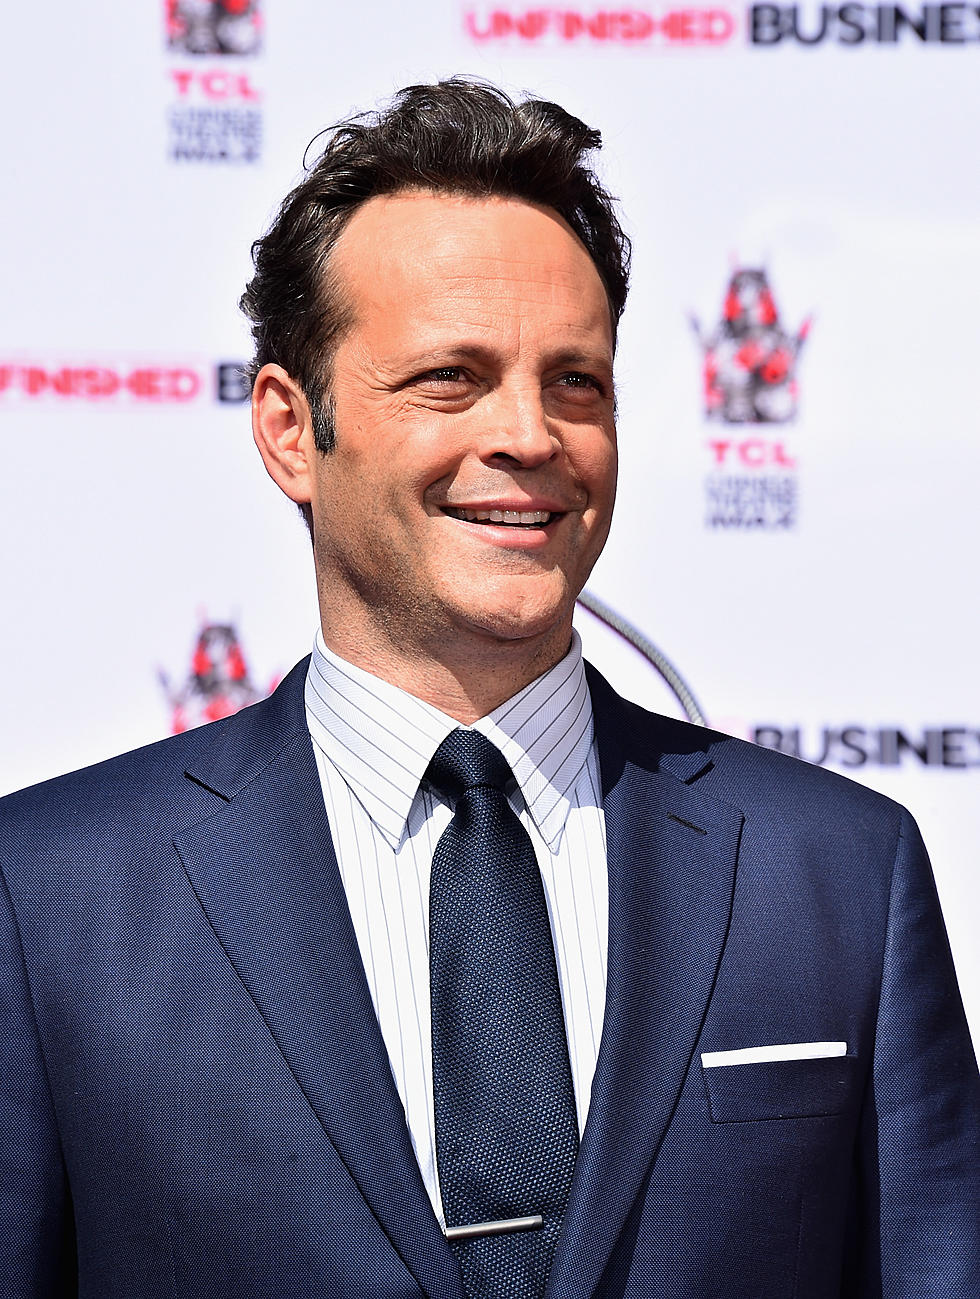 Actor Vince Vaughn Says ‘Guns Should Be Allowed In Schools.’